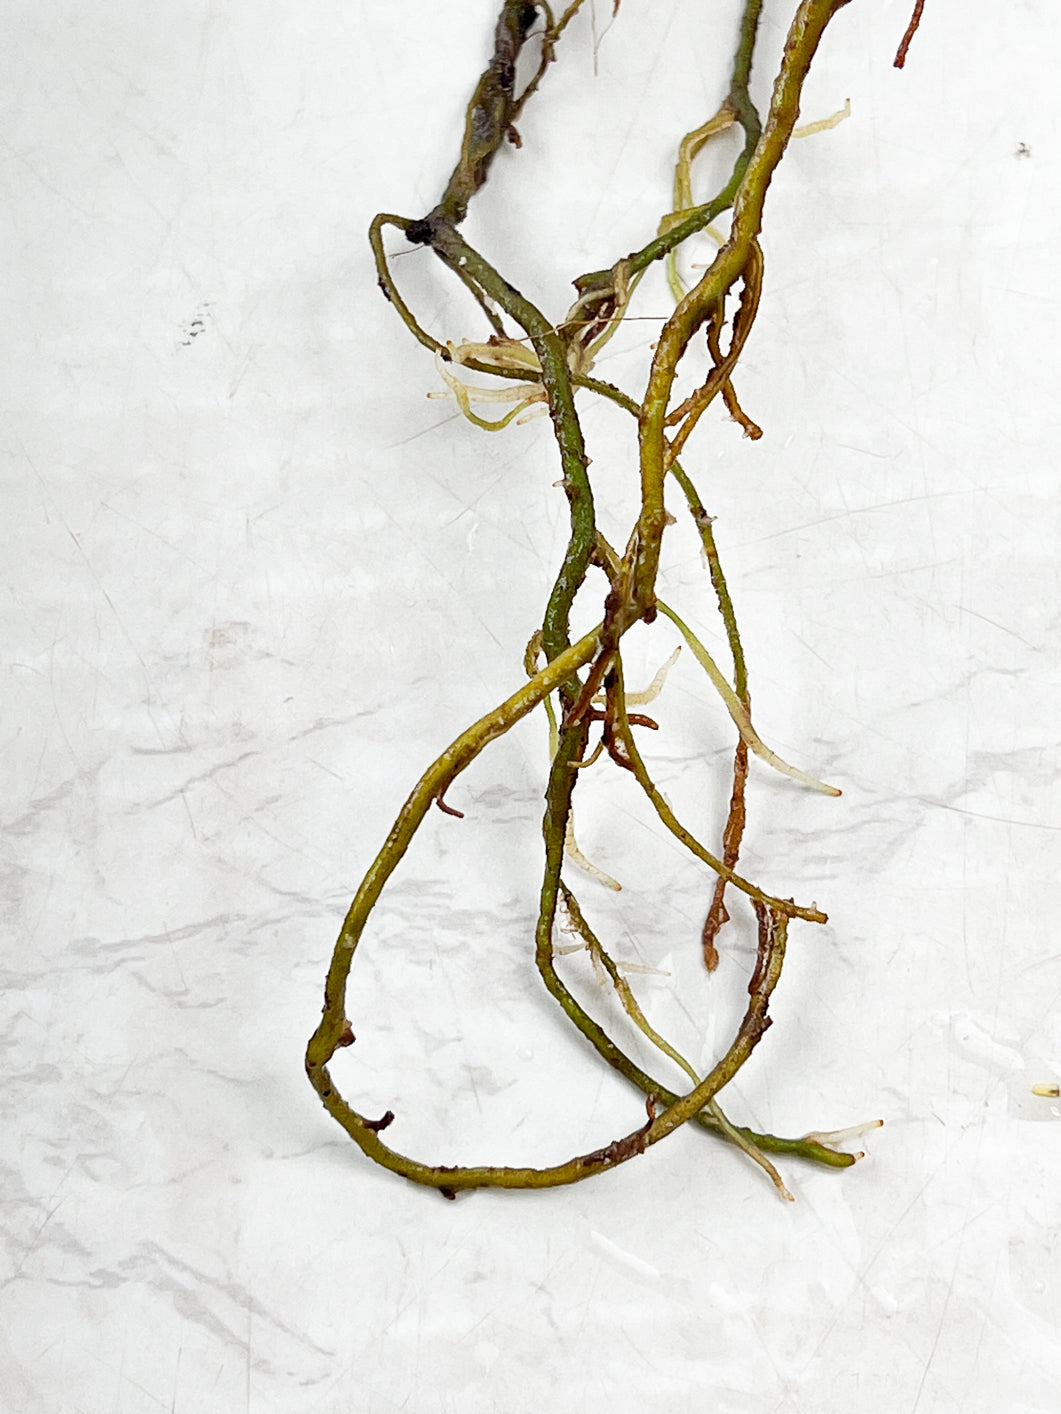 Philodendron Florida Beauty slightly rooted node with an active sprout (Leafless)